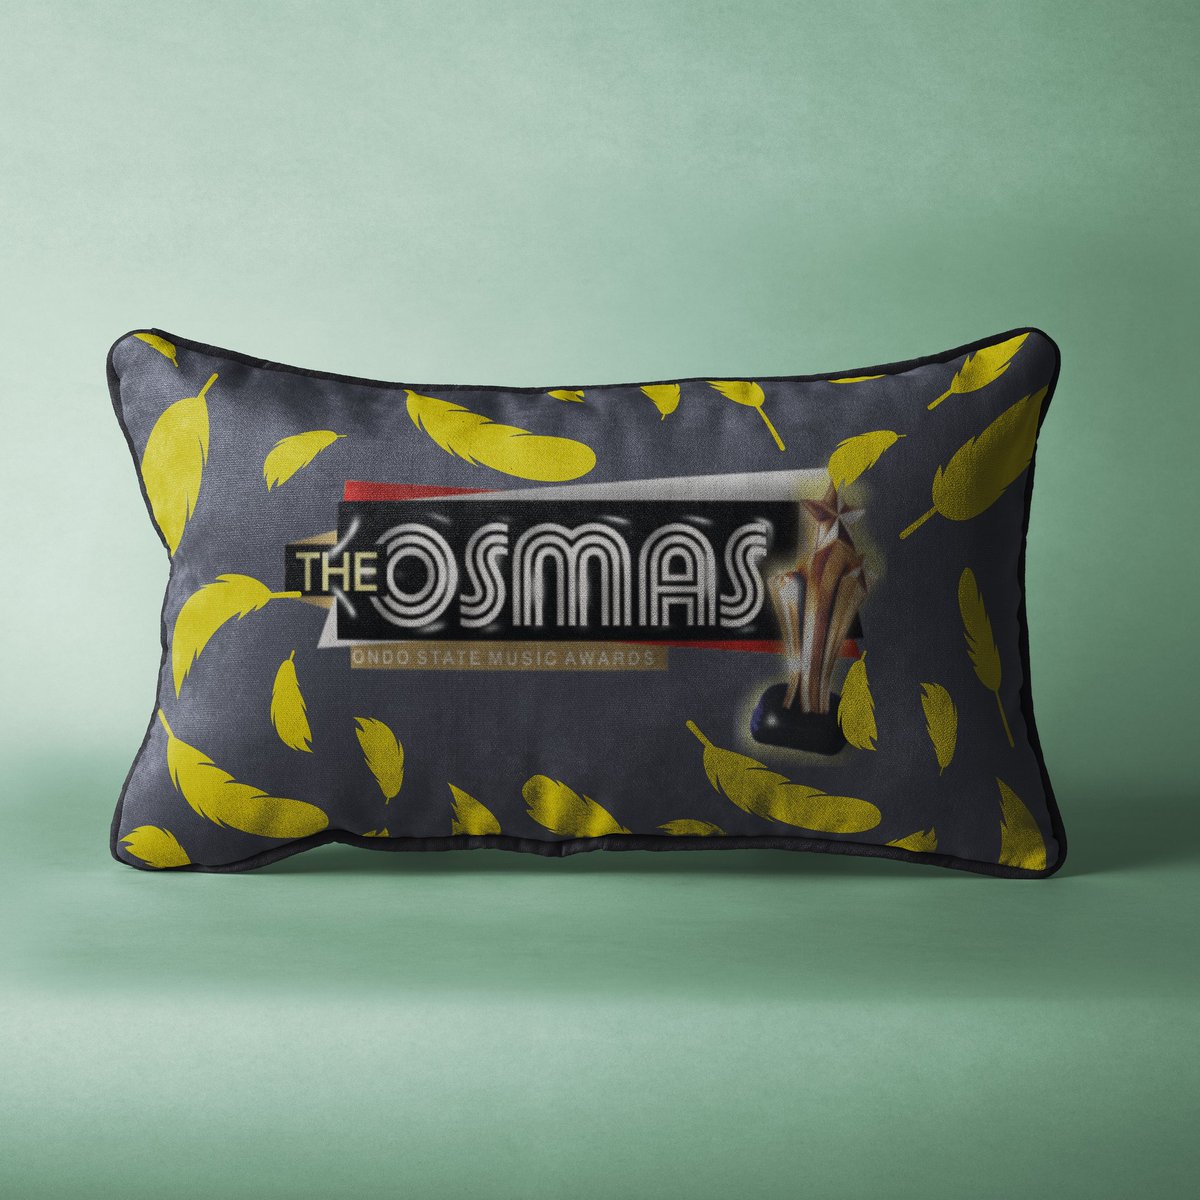 Branded Throw Pillow for @the_osmas

Link up for yours
+234 706 422 8056 (Also available via WhatsApp)

#Designs #MockUp #Prints #Logo #Flyers #Posters #Calendars #Stationeries #Shirts #3DDesigns #Branding #Unique #Handy #Quick #Delivery #Office #Pen #RedCarpet #Events #Backdrop